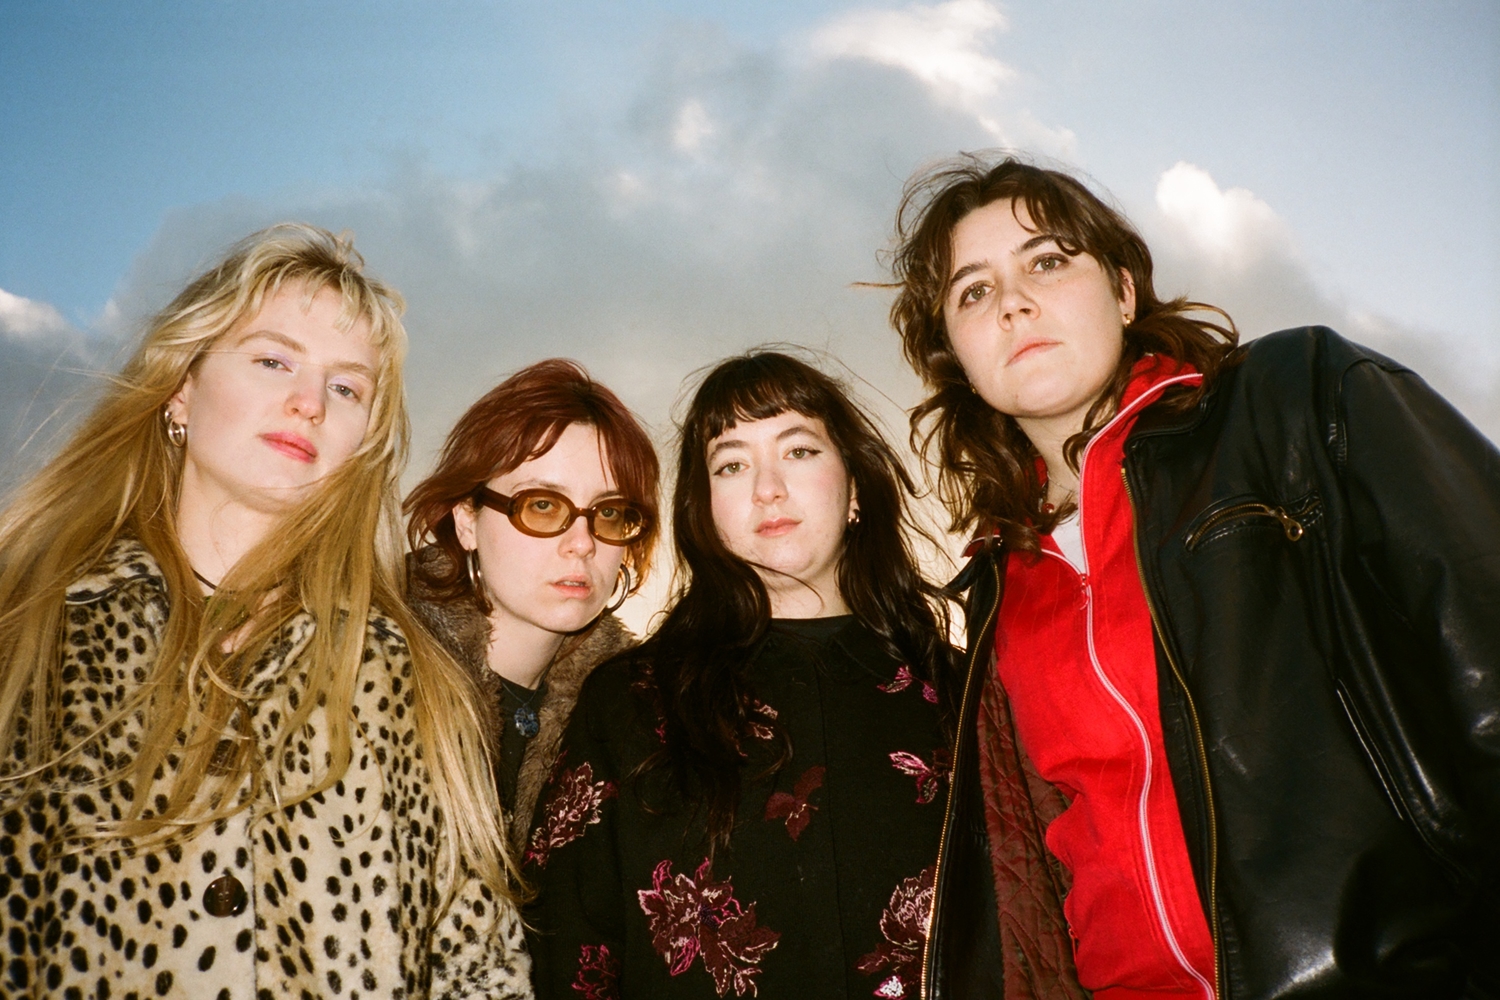 Lime Garden talk Brighton, friendship, and their debut album ‘One More Thing’